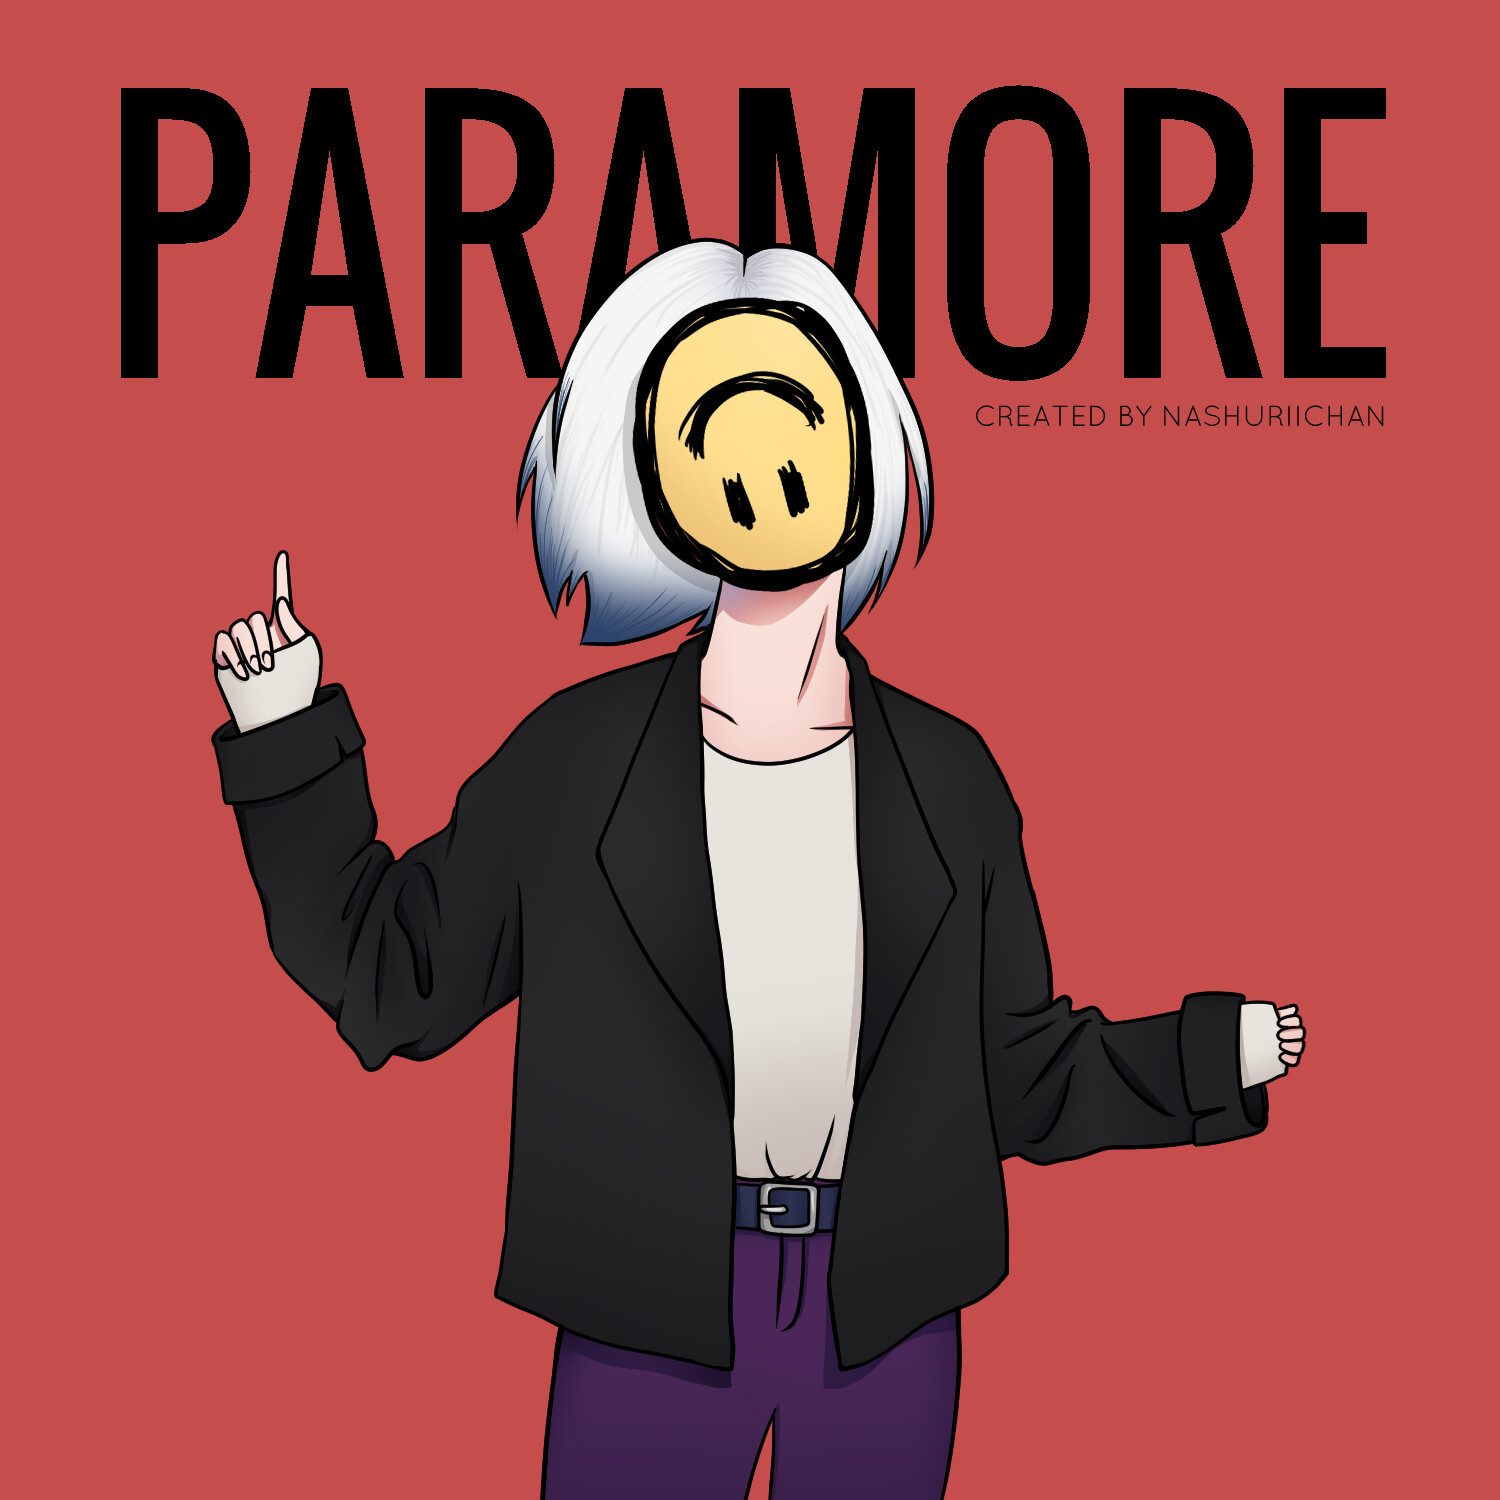 ArtStation - Paramore Spotify Playlist Cover